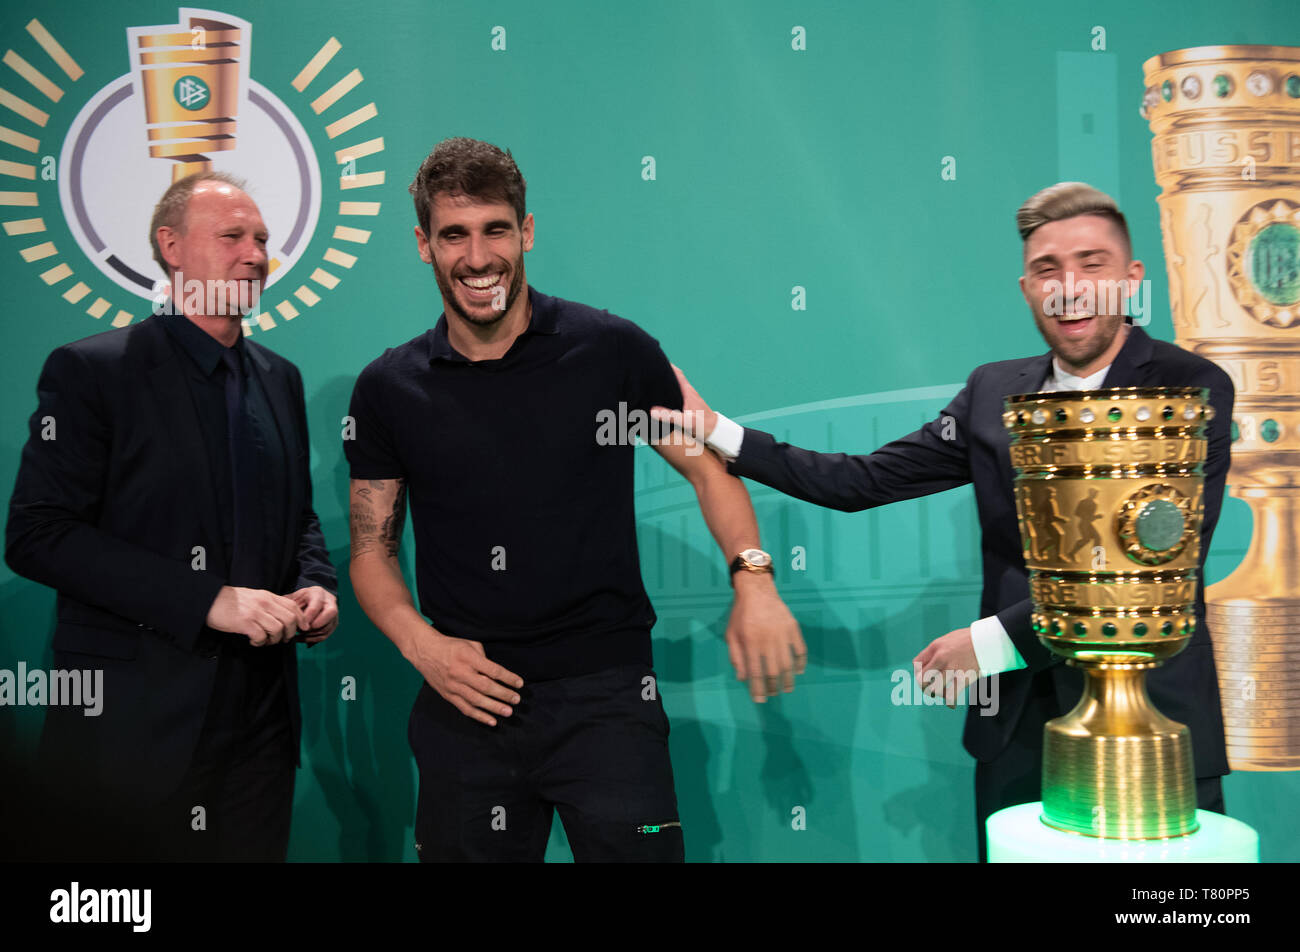 Berlin, Germany. 10th May, 2019. Soccer: DFB Cup, Cup Handover of the DFB Cup. Javi Martinez (M), central defender at FC Bayern Munich, and Kevin Kampl (r), midfielder at RB Leipzig, laugh next to the trophy after the event. On the left is Perry Bräutigam, former national goalkeeper of the GDR national team and current goalkeeper scout at RB Leipzig. Credit: Soeren Stache/dpa/Alamy Live News Stock Photo